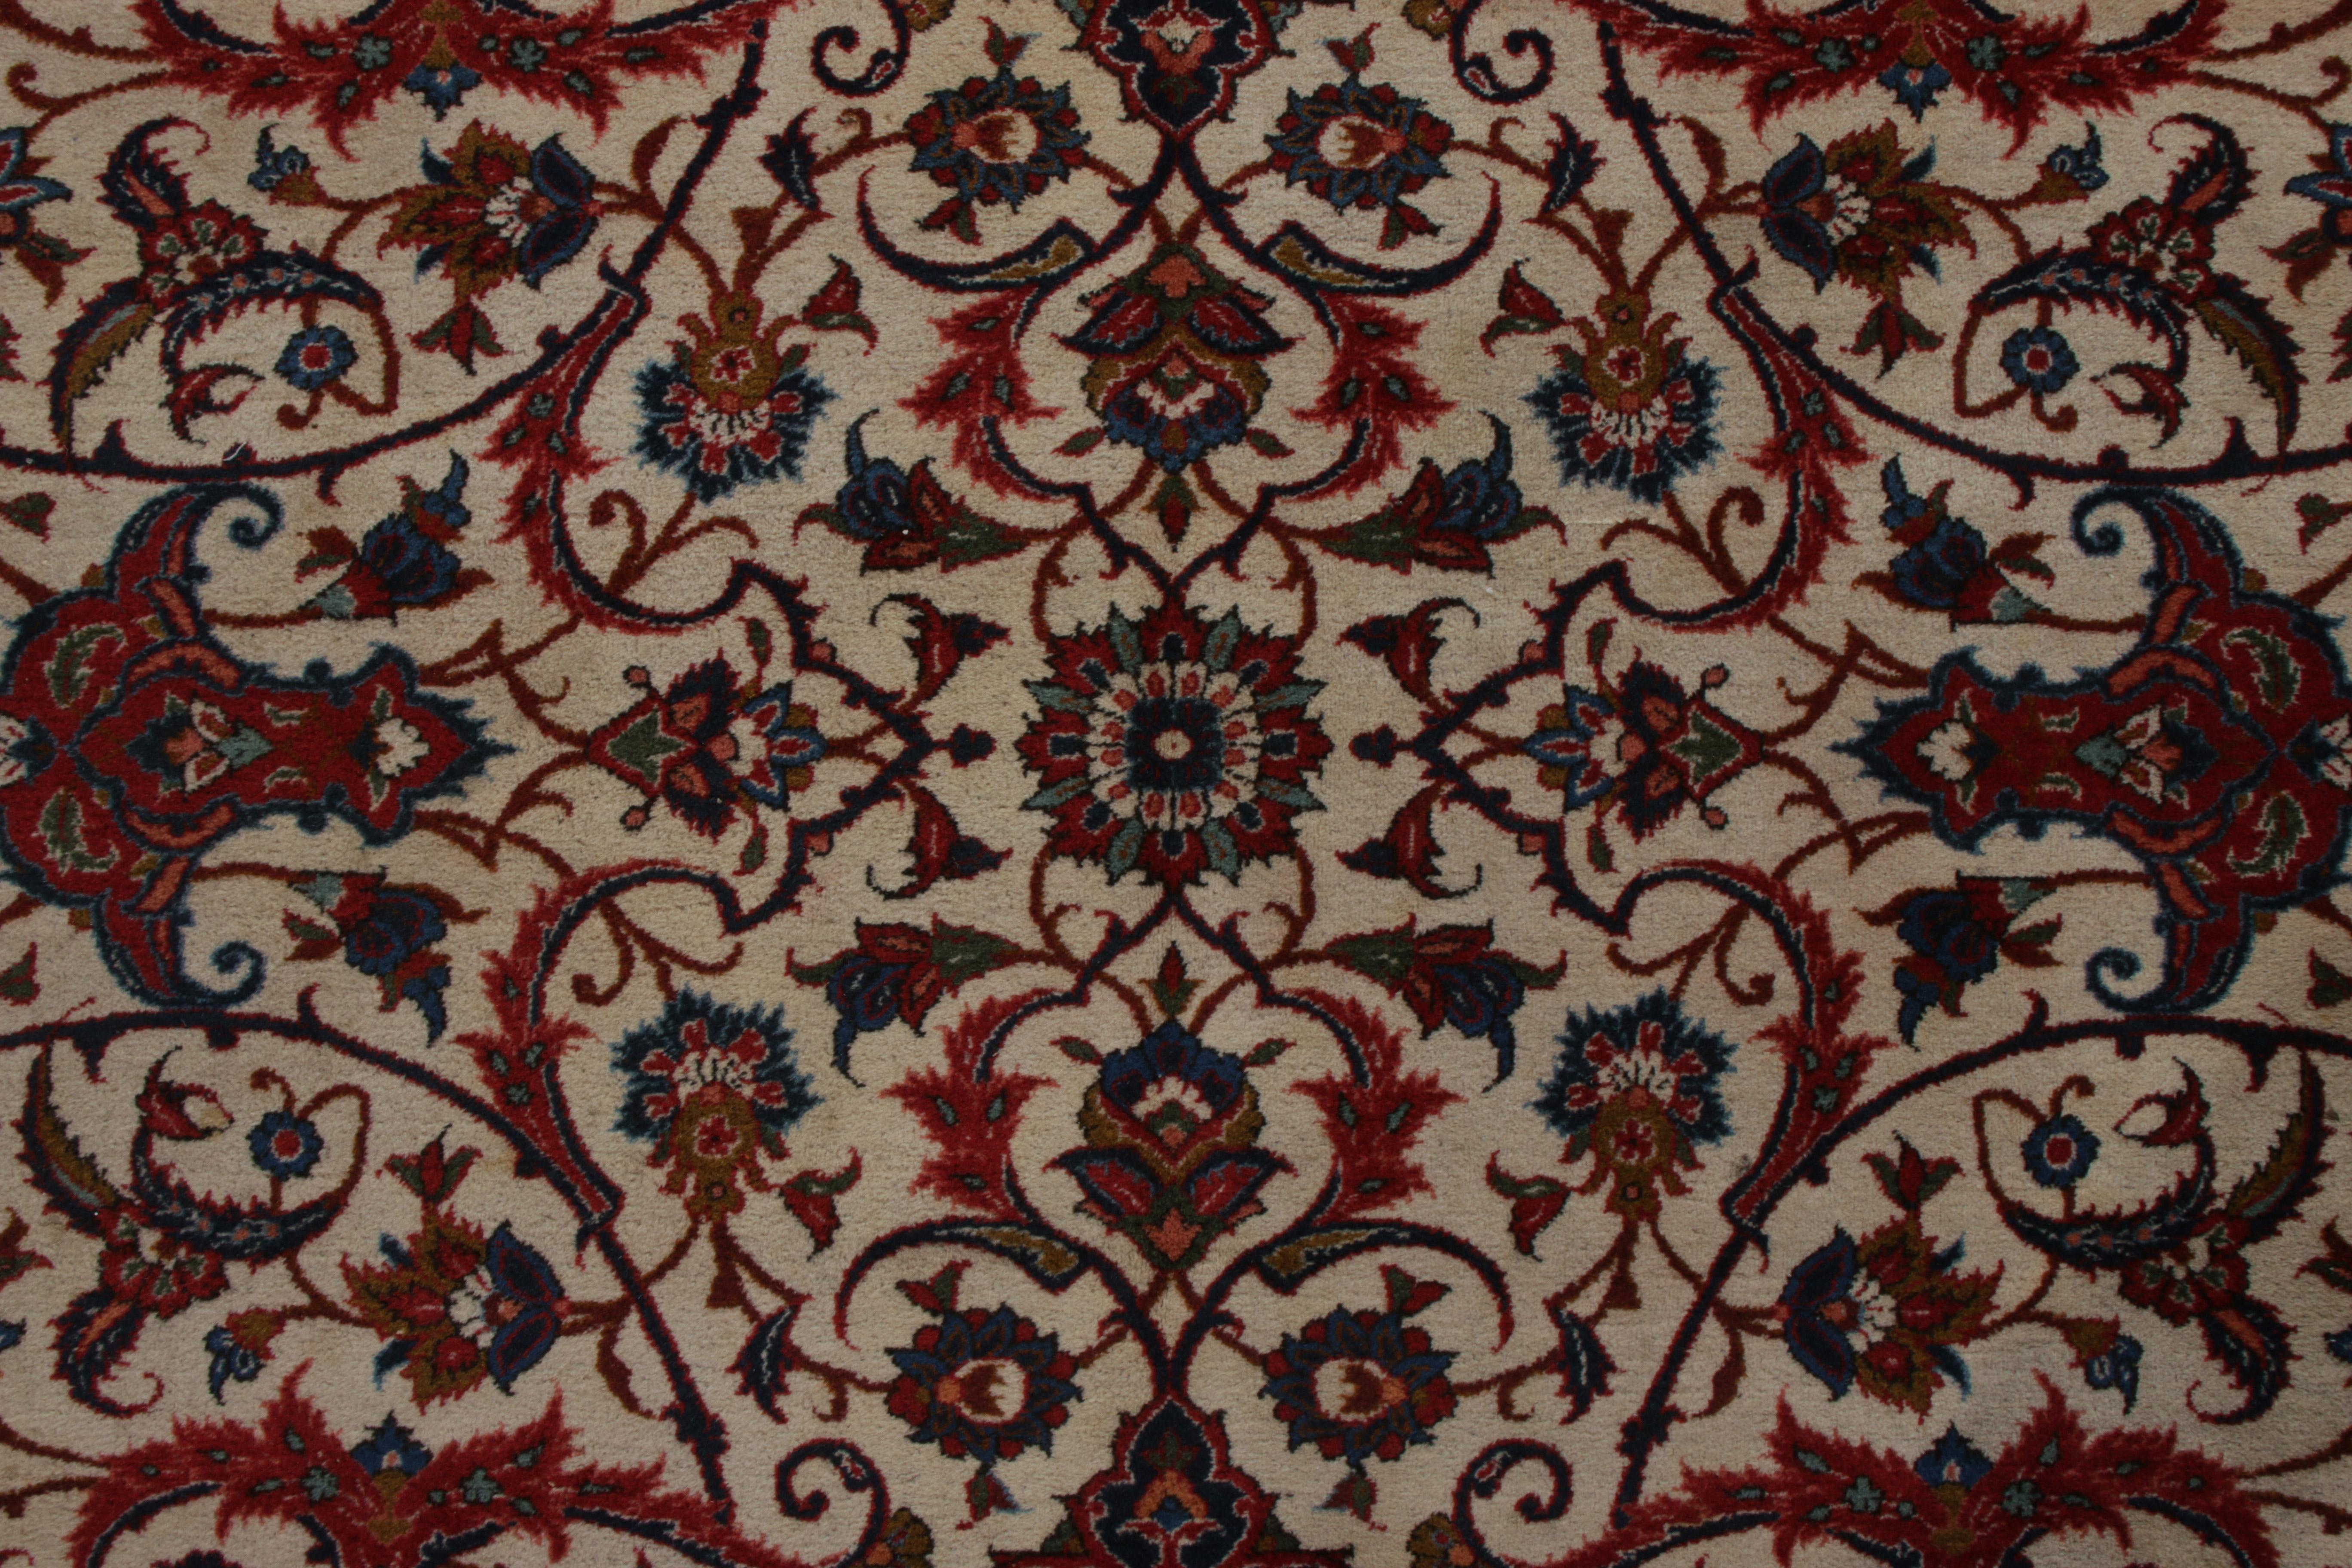 Hand-Knotted Vintage Isfahan Rug in All over Red, Blue, Beige Floral Pattern In Good Condition For Sale In Long Island City, NY